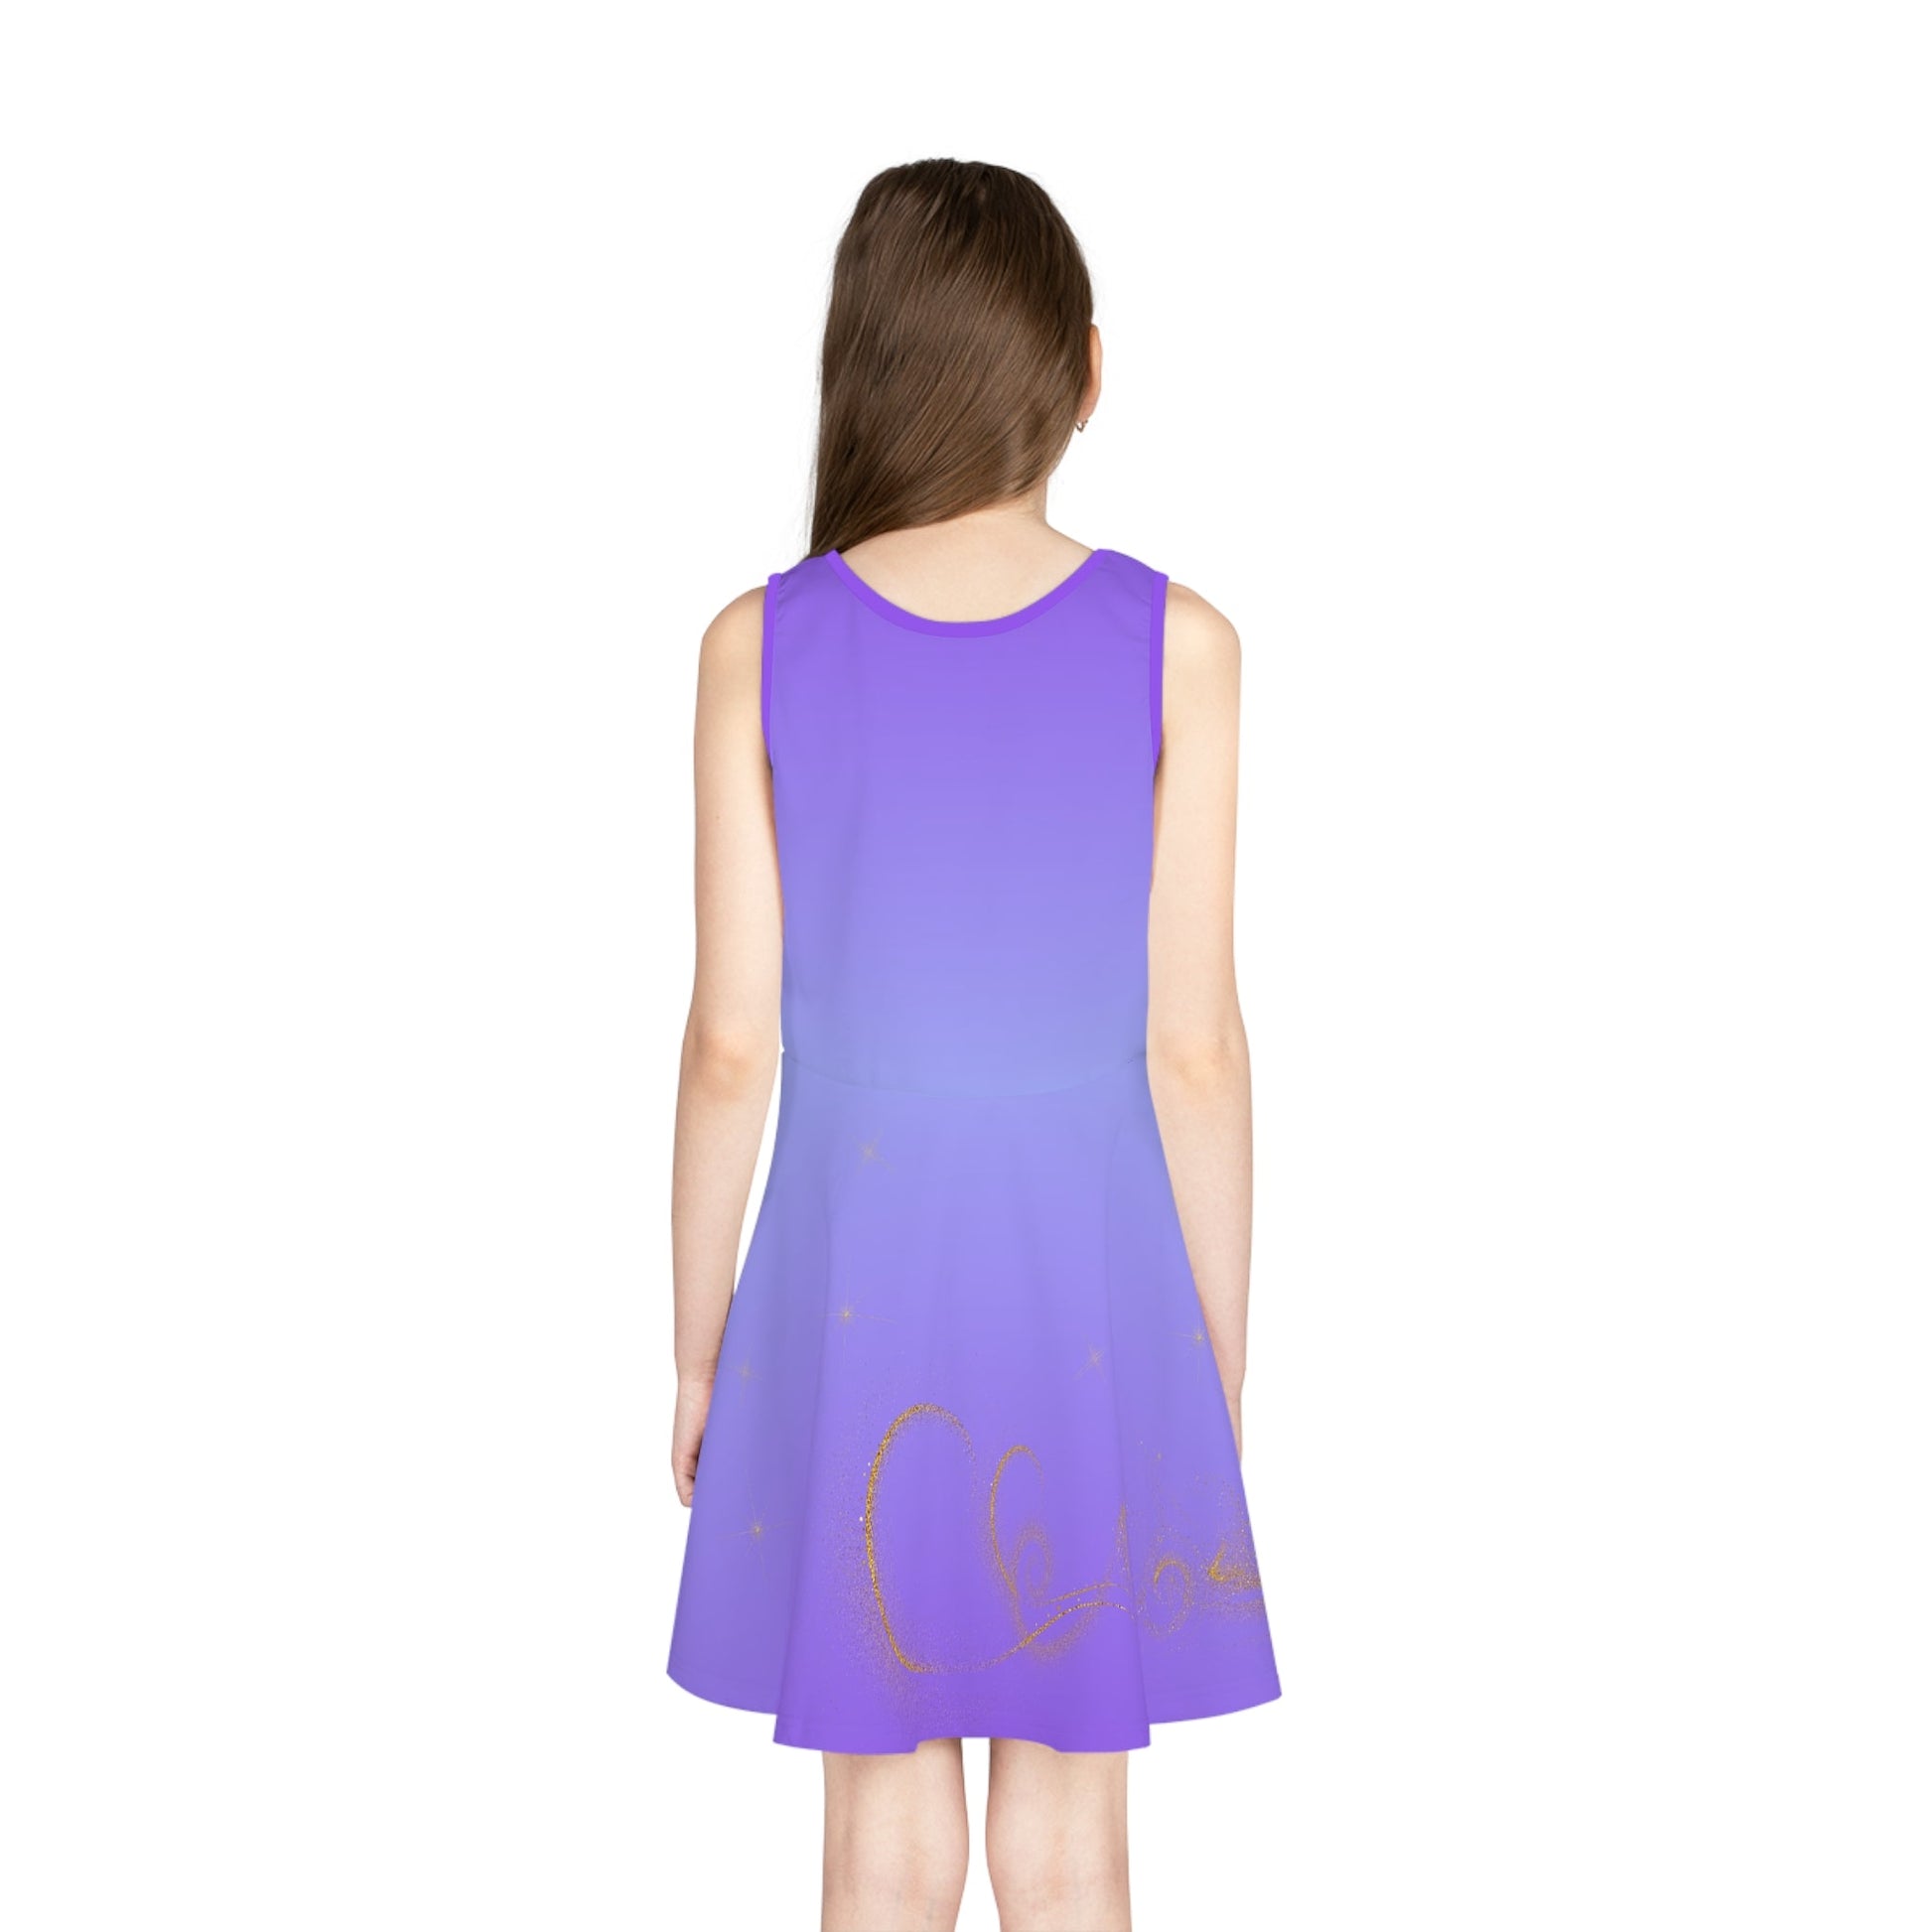 Magical Carriage Girls' Sleeveless Sundress All Over PrintAOPAOP Clothing#tag4##tag5##tag6#